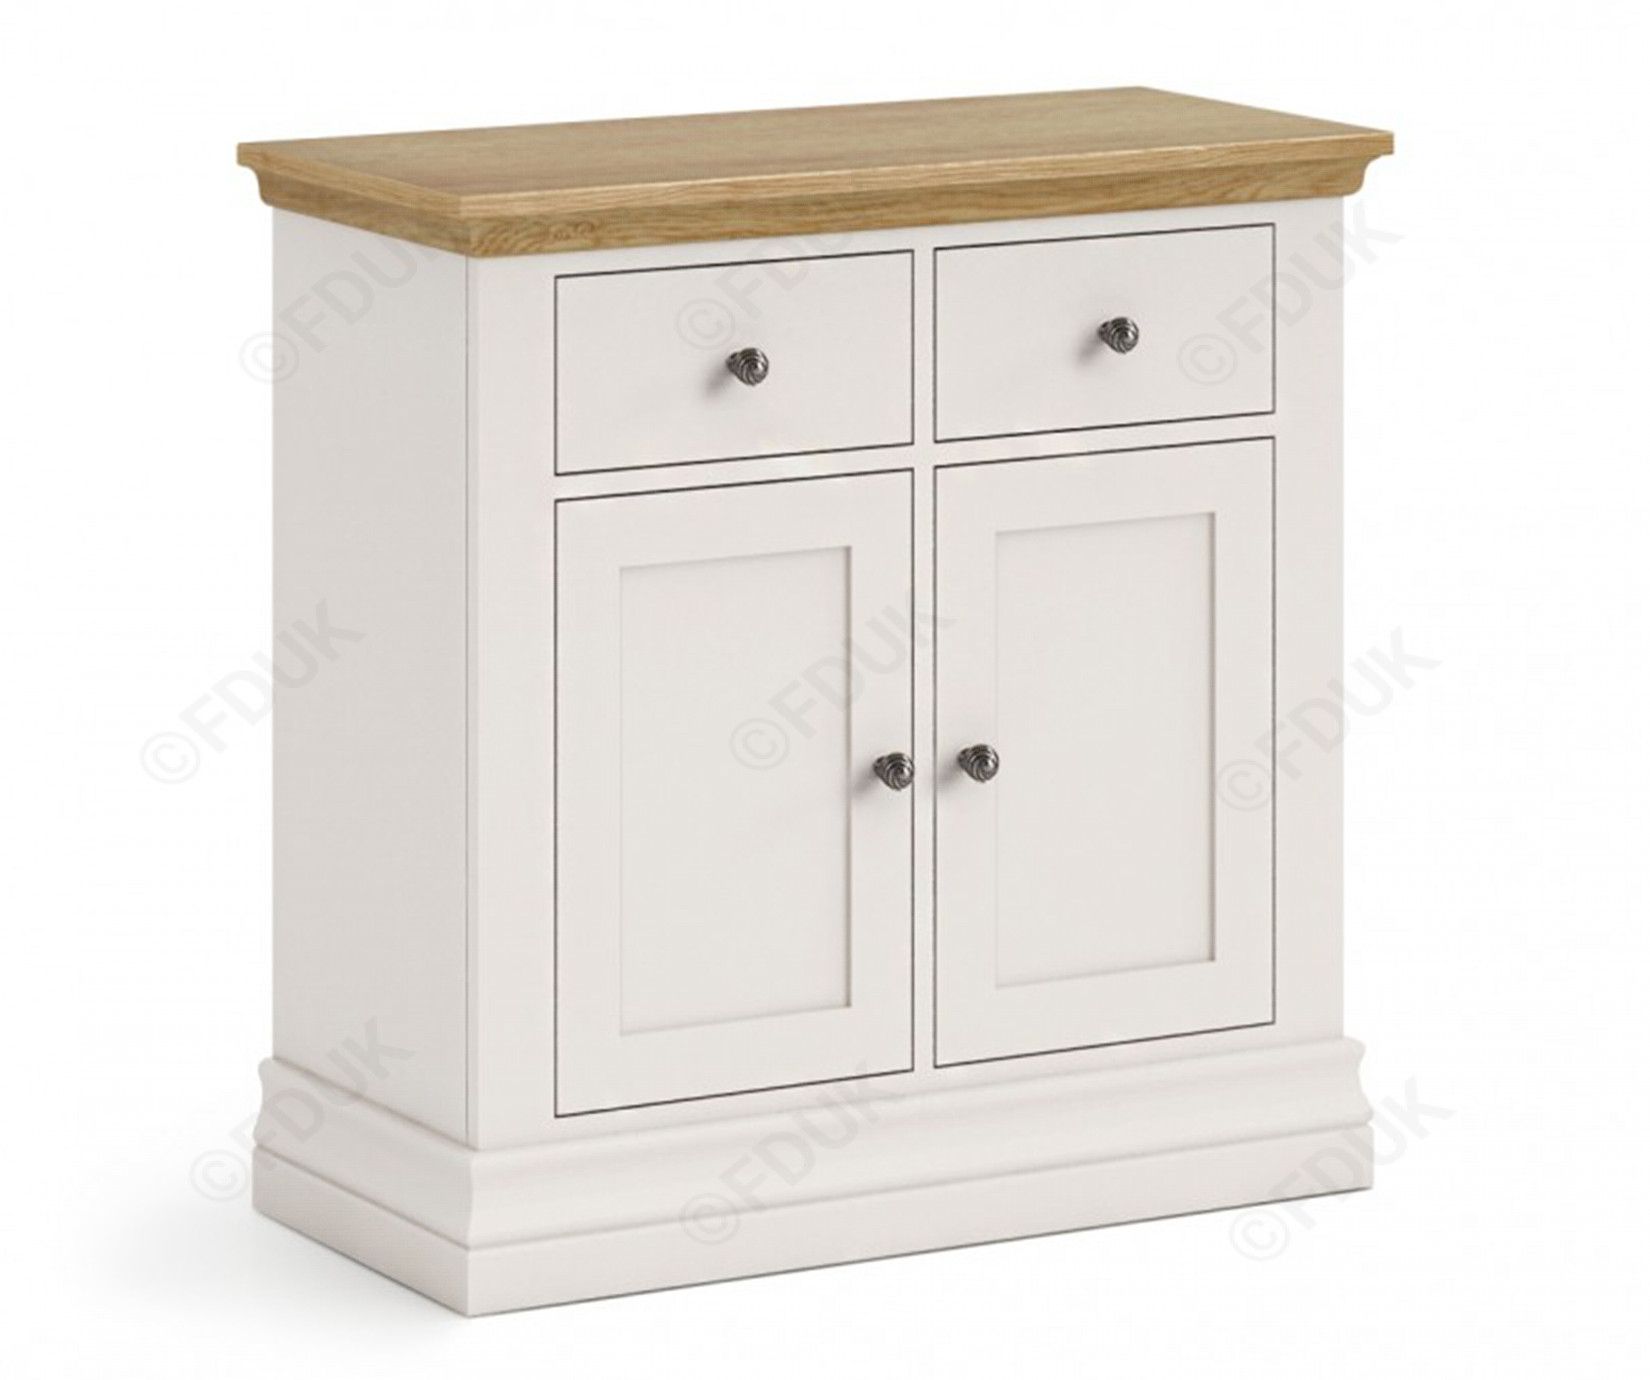 Corndell Annecy Mini Sideboard Fduk Best Price Guarantee We Will Beat Our  Competitors Price! Give Our Sales Team A Call On 0116 235 77 86 And We Will Within 2018 Annecy Sideboards (View 6 of 20)